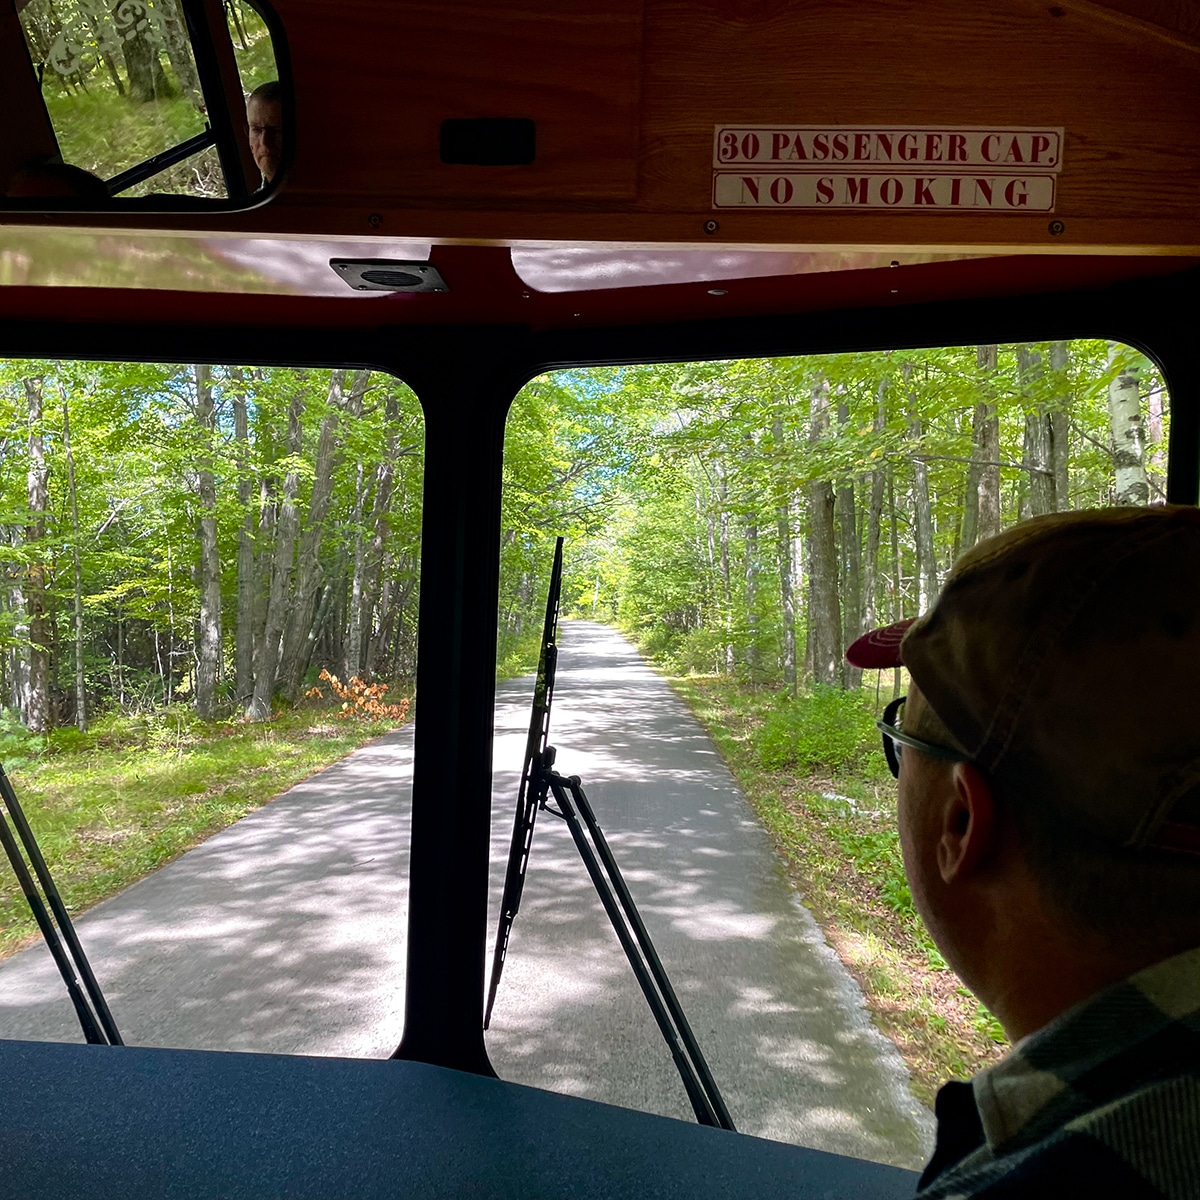 Looking out the front window of our trolly while on the Door County trolly tour.